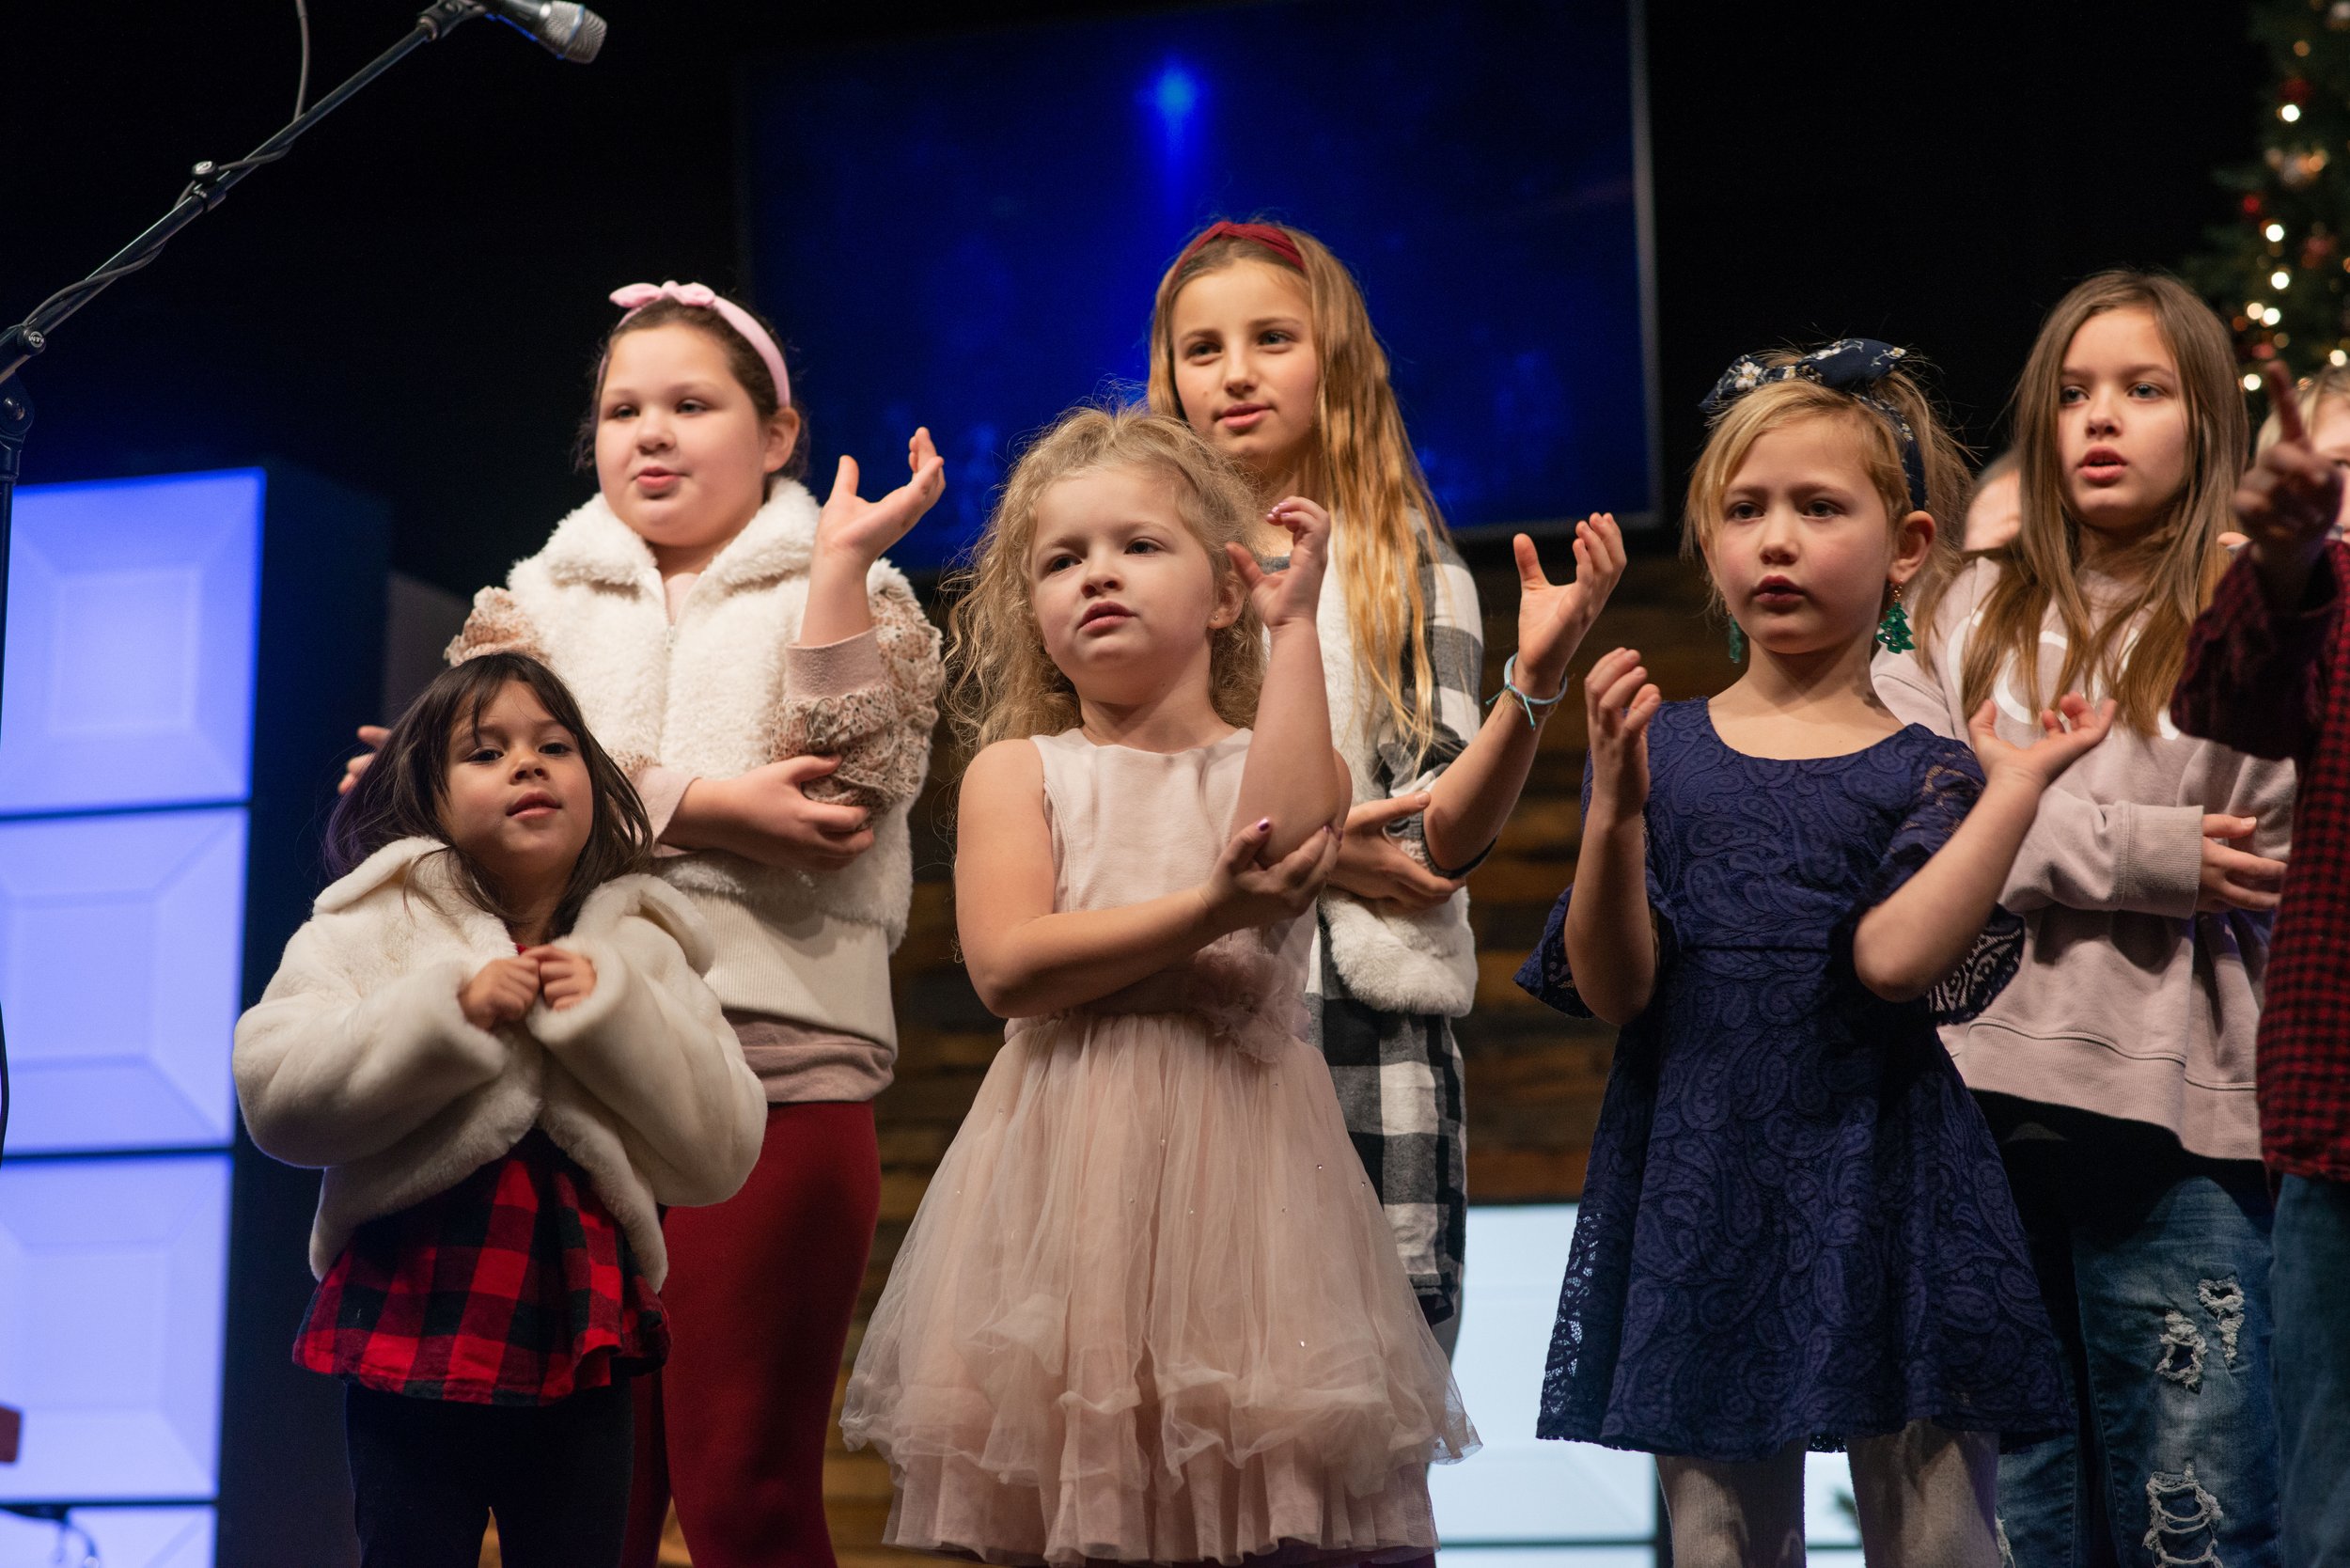 2022.12.18 NCC Owosso Christmas children's ministry - Ariana5.jpg